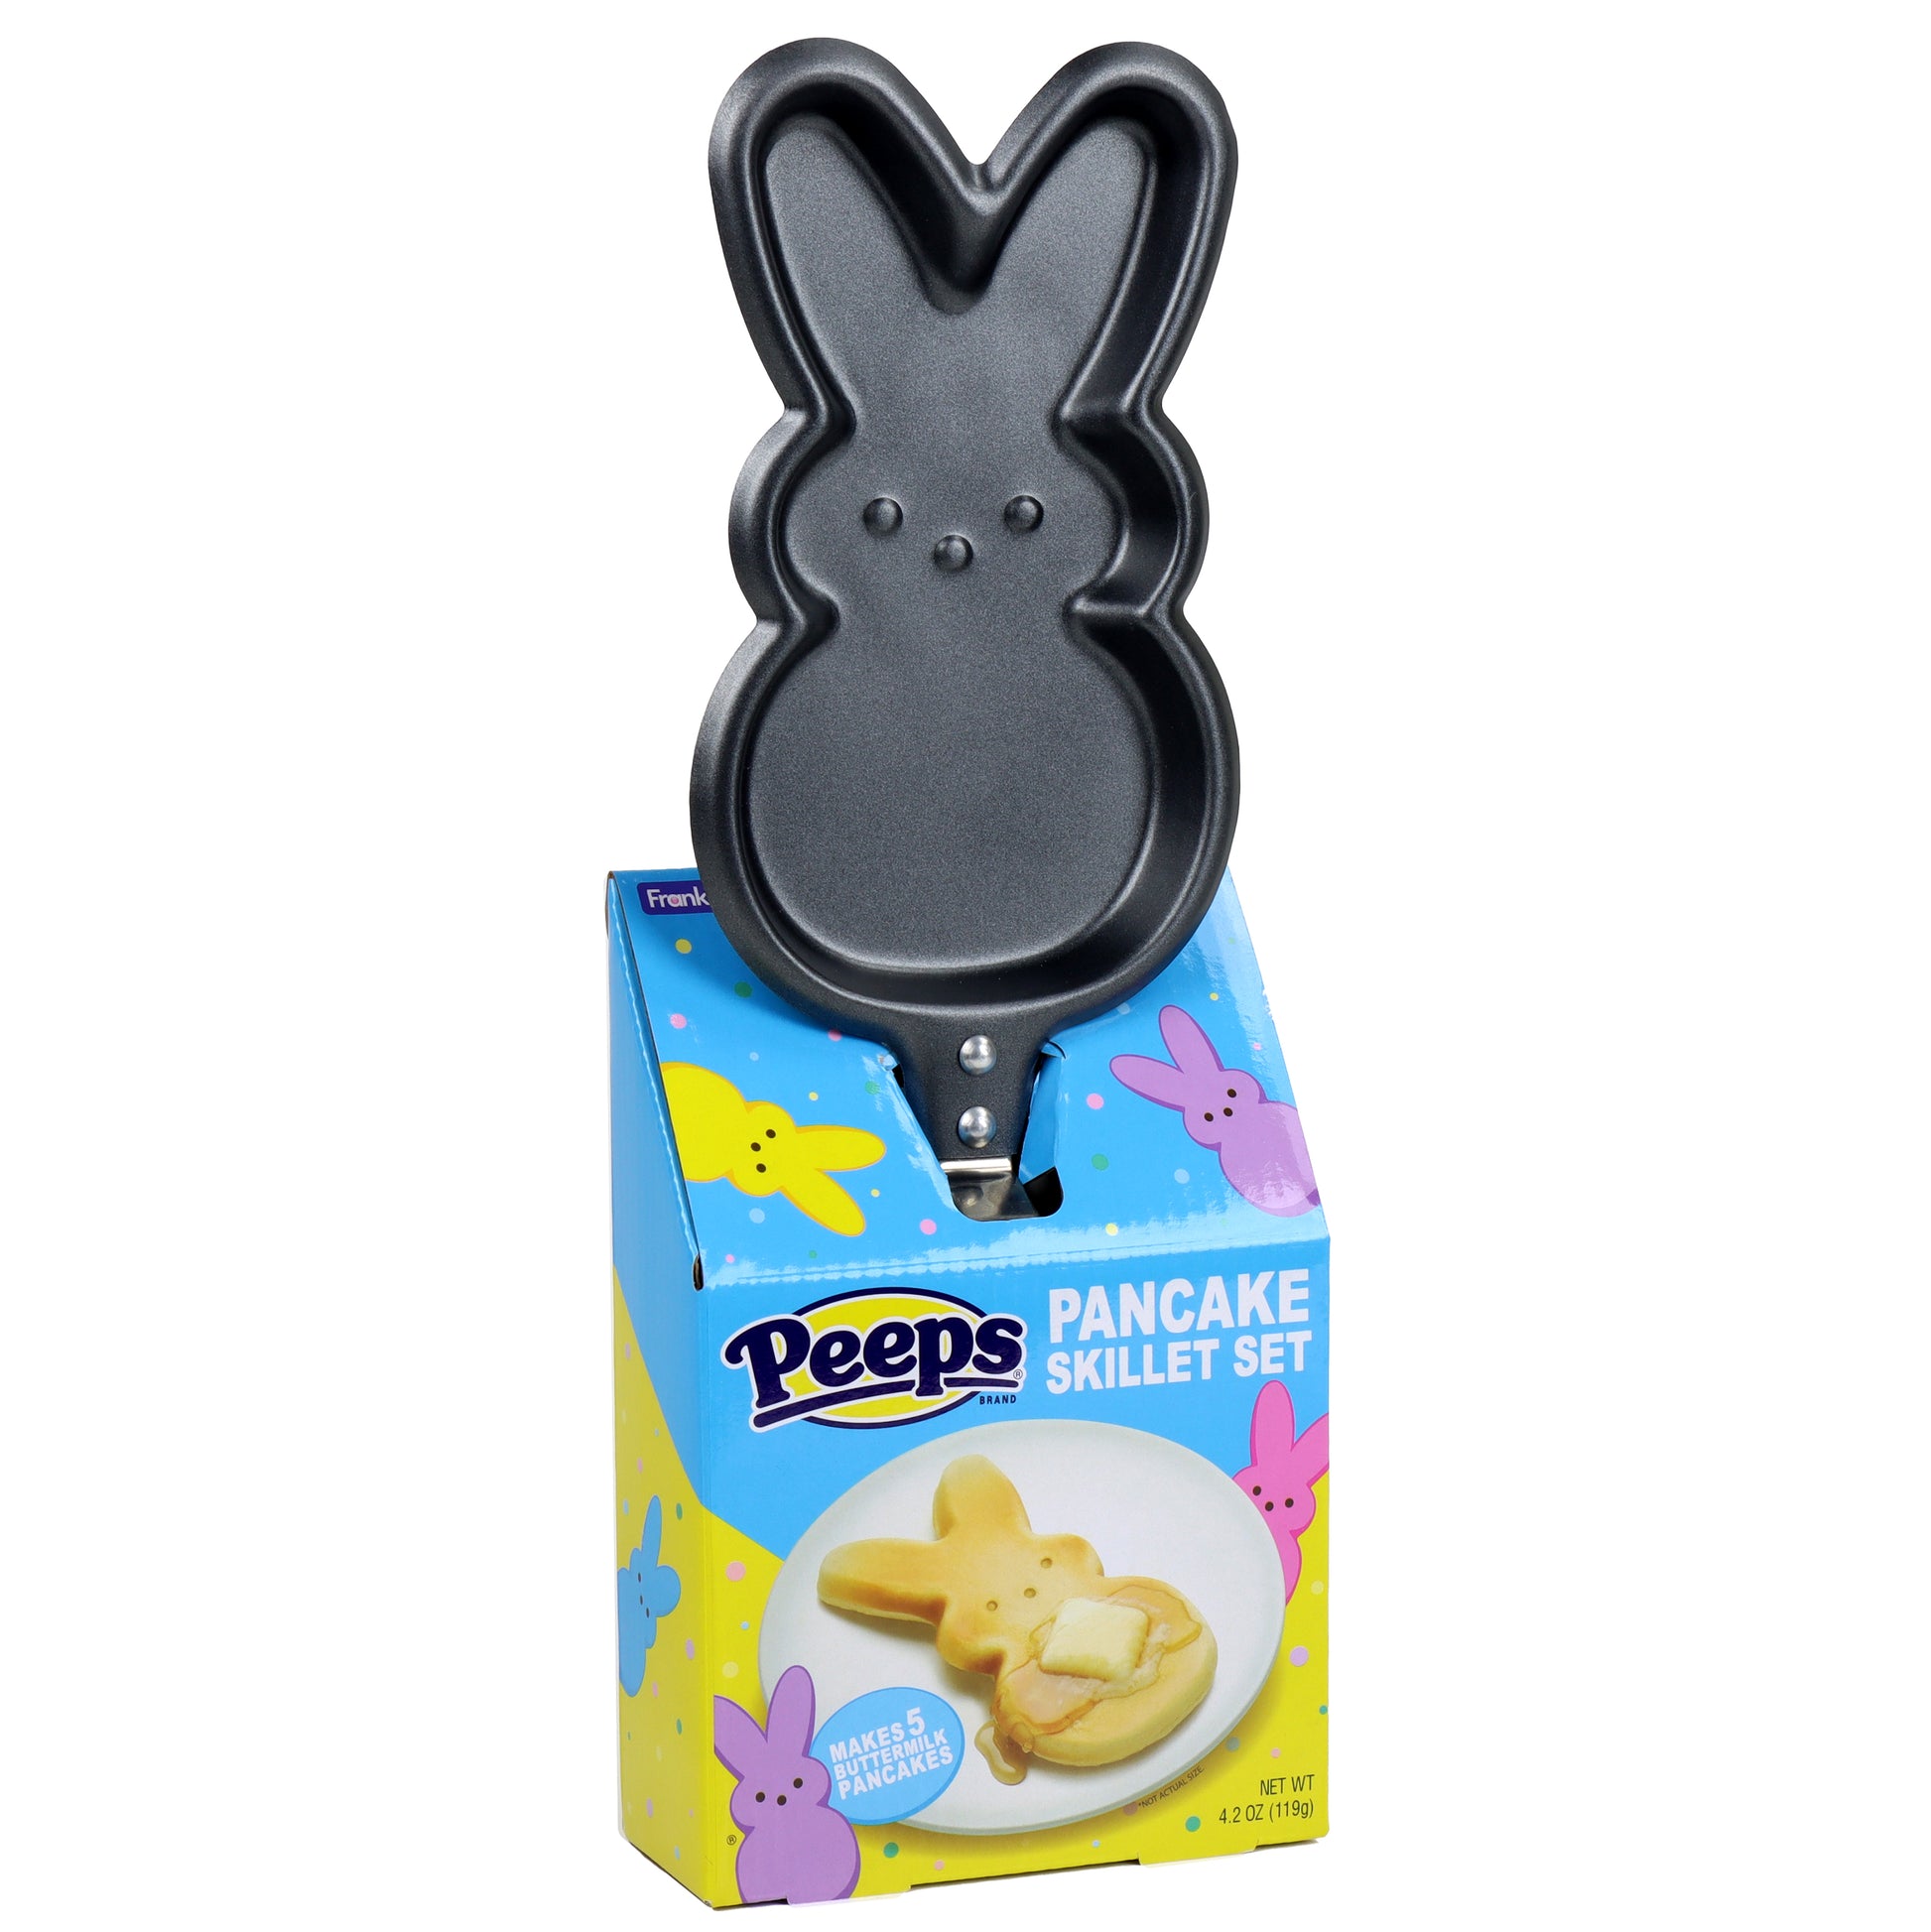 bunny shaped pancake skillet in a colorful box